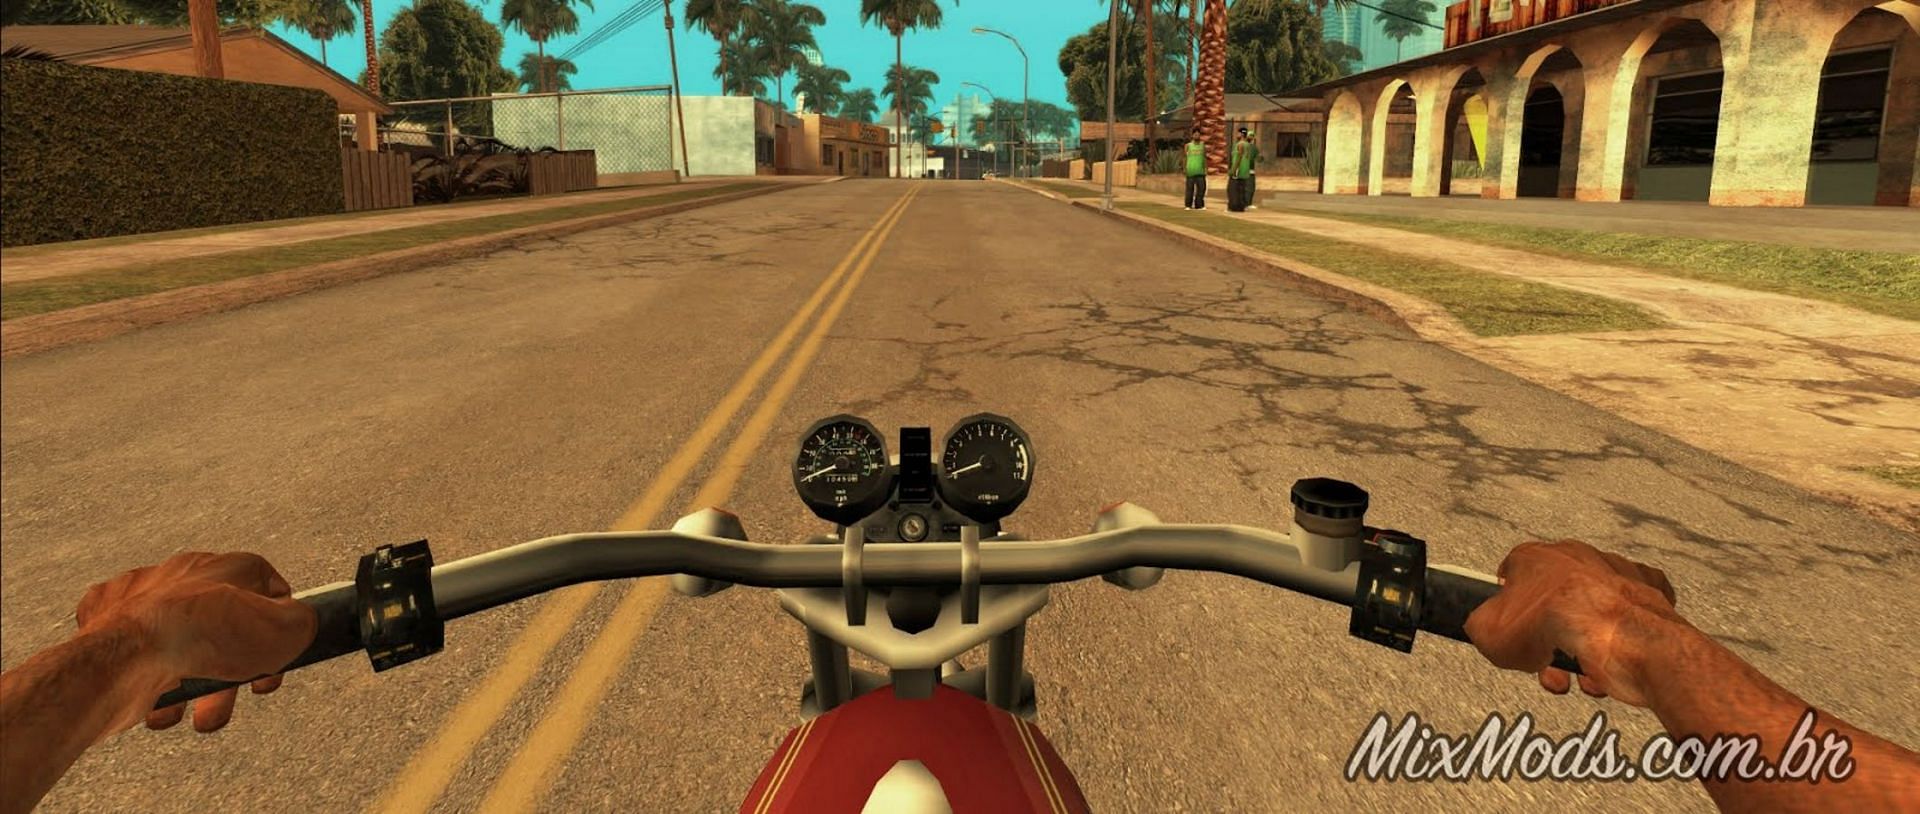 An example of 1st Person POV in GTA San Andreas (Image via MixMods.com.br)